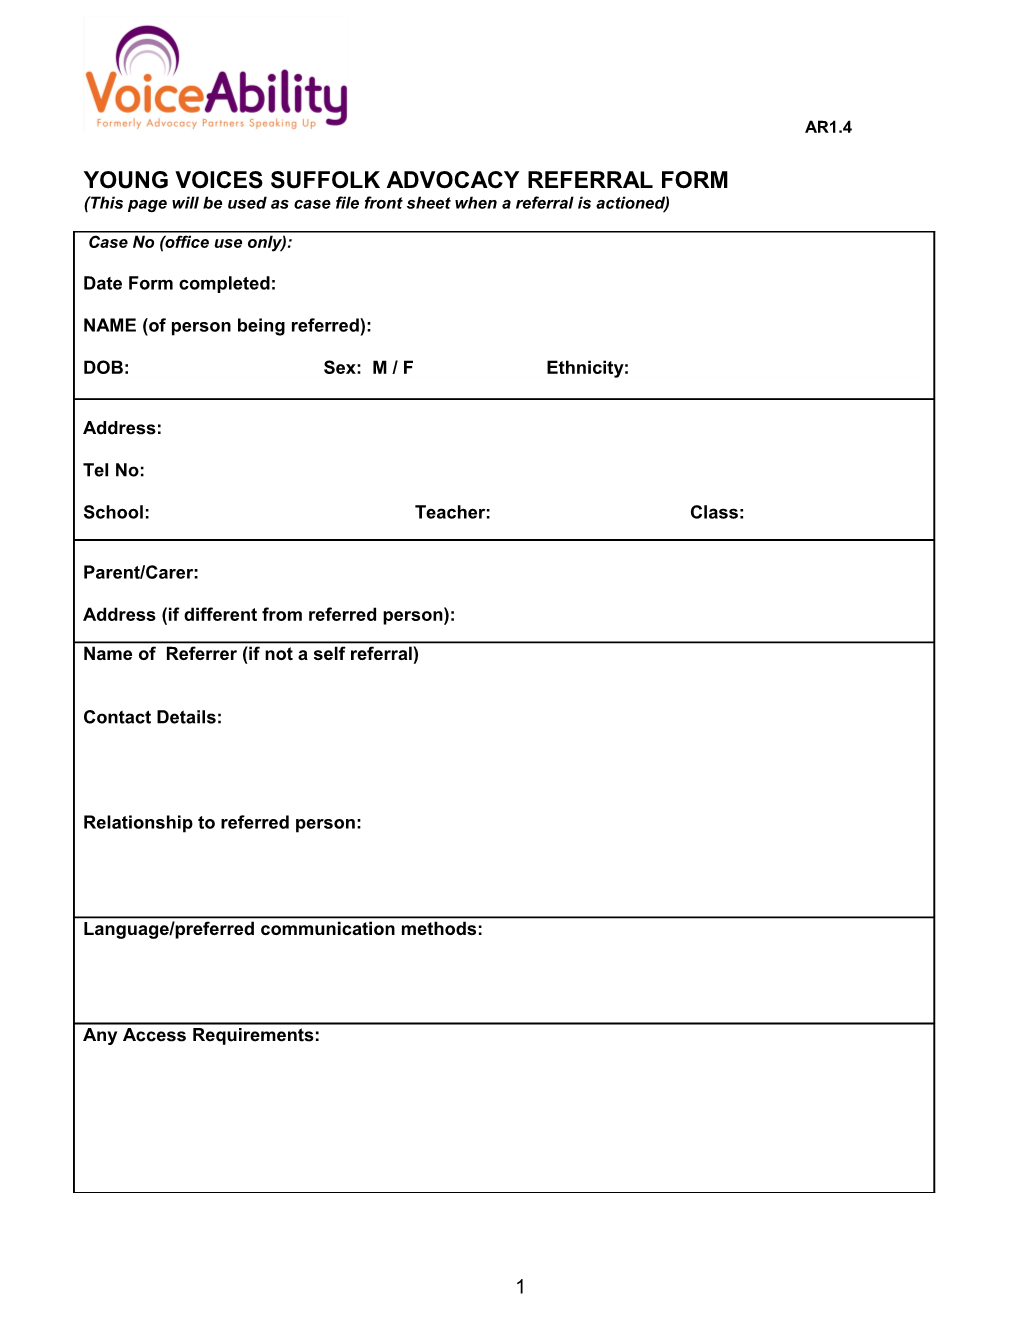 Speaking up Advocacy Referral Form